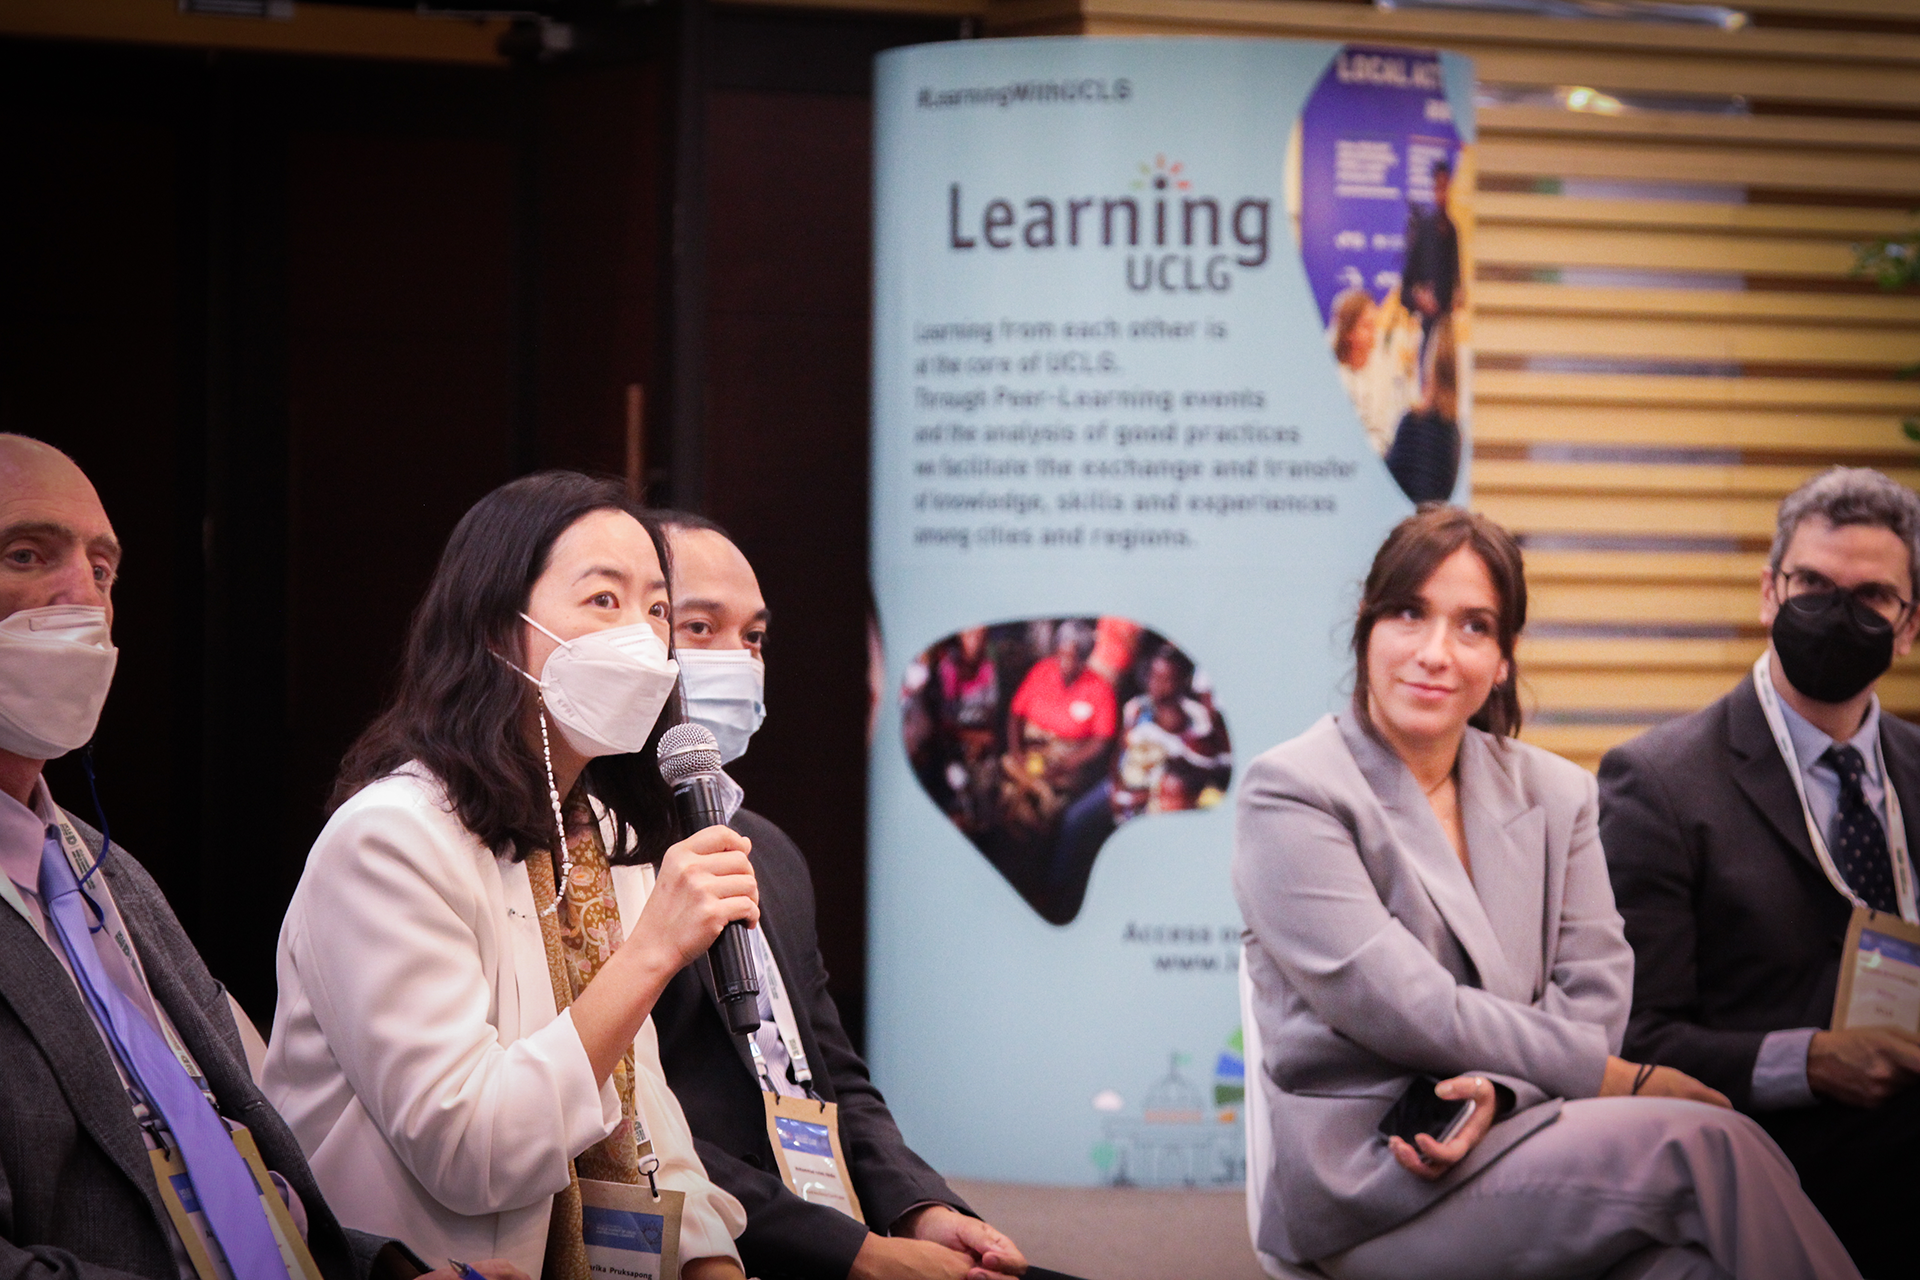 1.	A woman wearing a face mask holds a mic while sitting in between other persons. A column with UCLG Learning’s identity shows in the background.